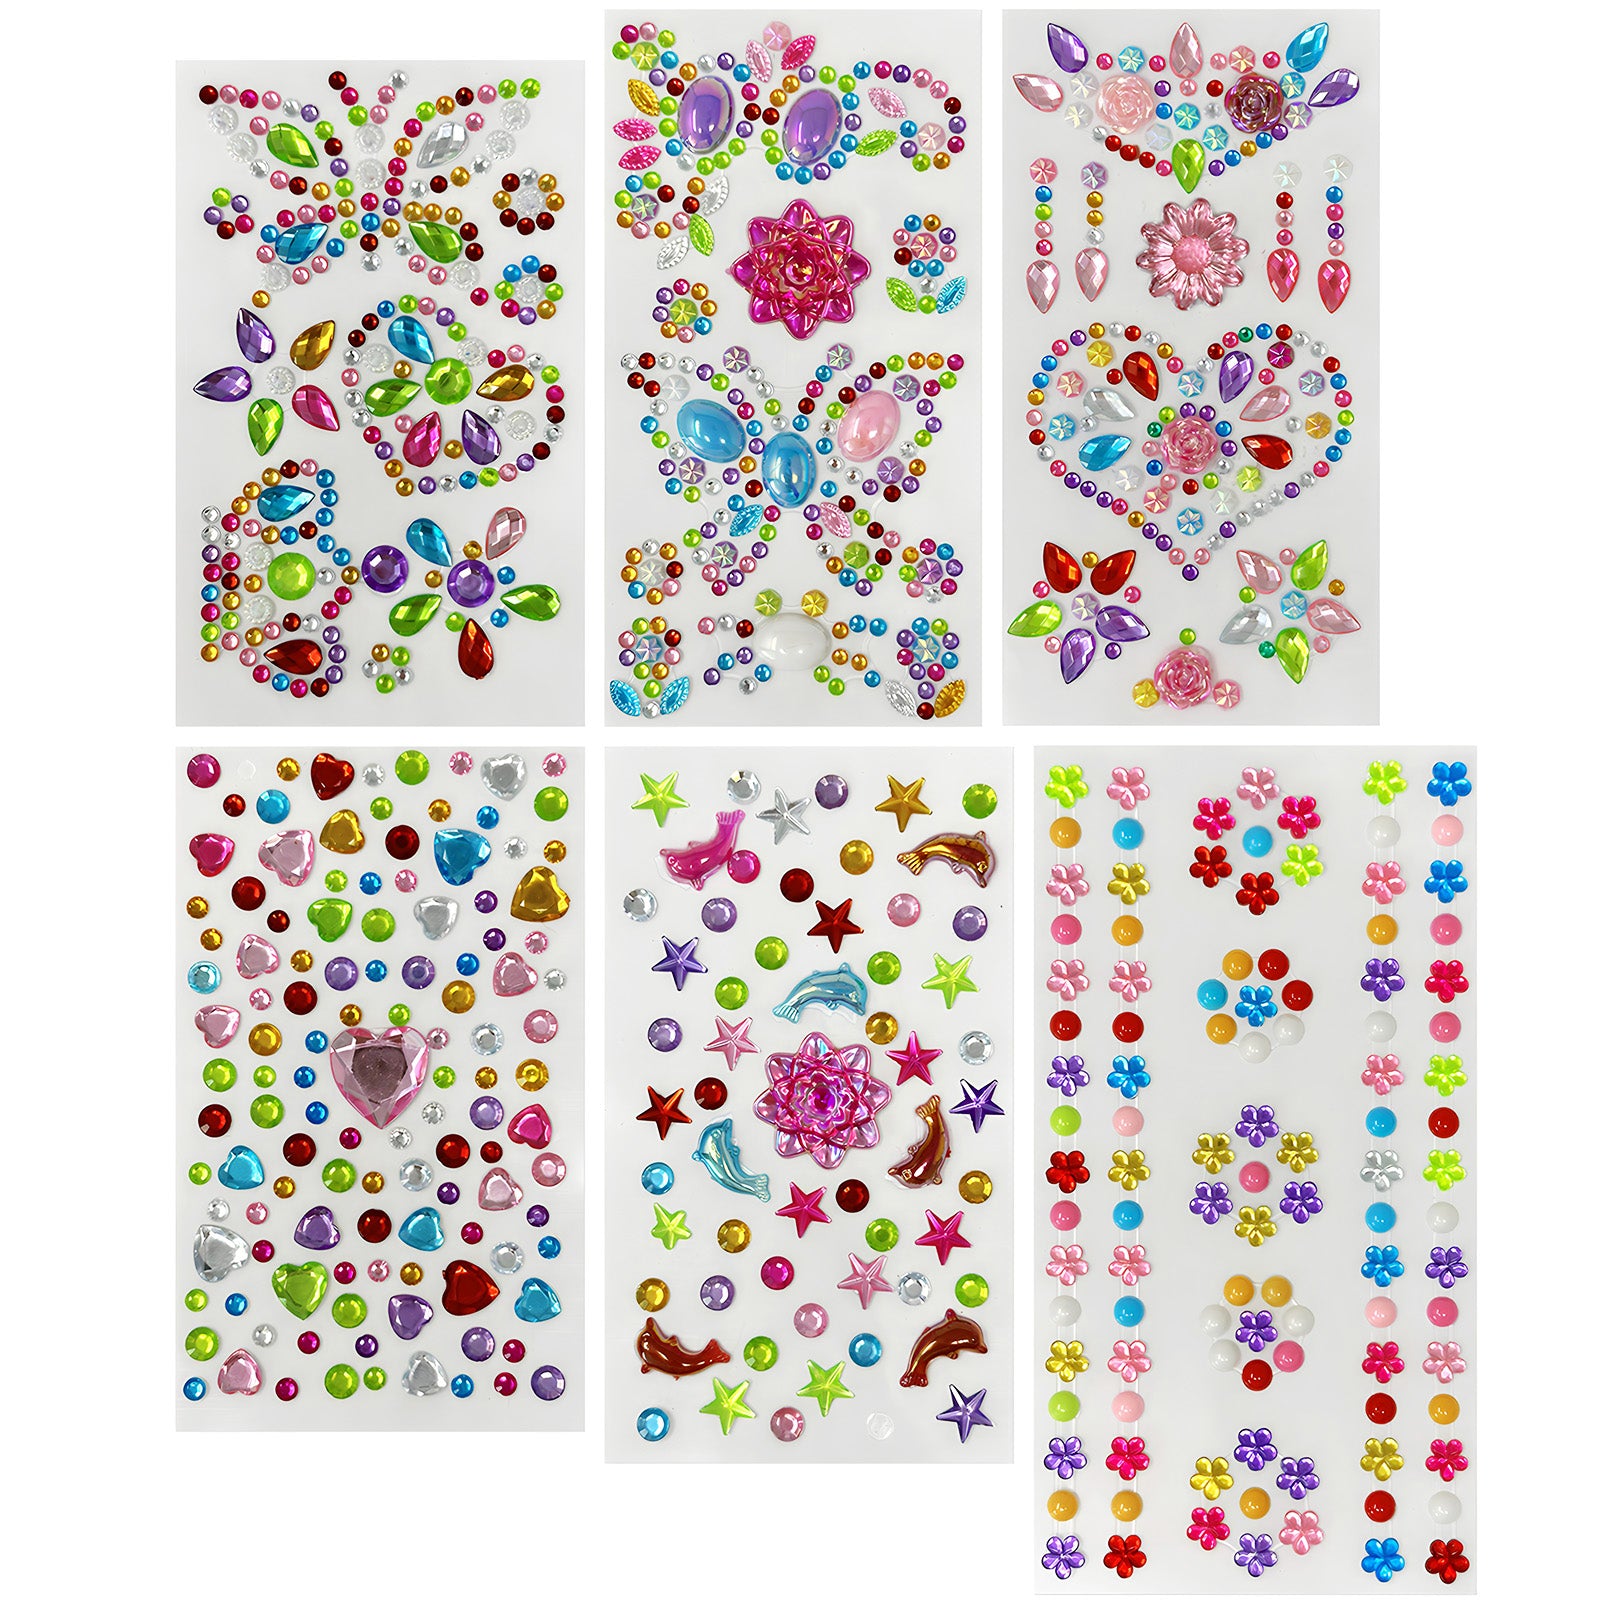 Wrapables Crystal Rhinestone Gem Stickers, Bling Jewel Adhesives for DIY Arts & Crafts, Smartphones, Water Bottles, Sunglass Cases (Set of 6) Floral